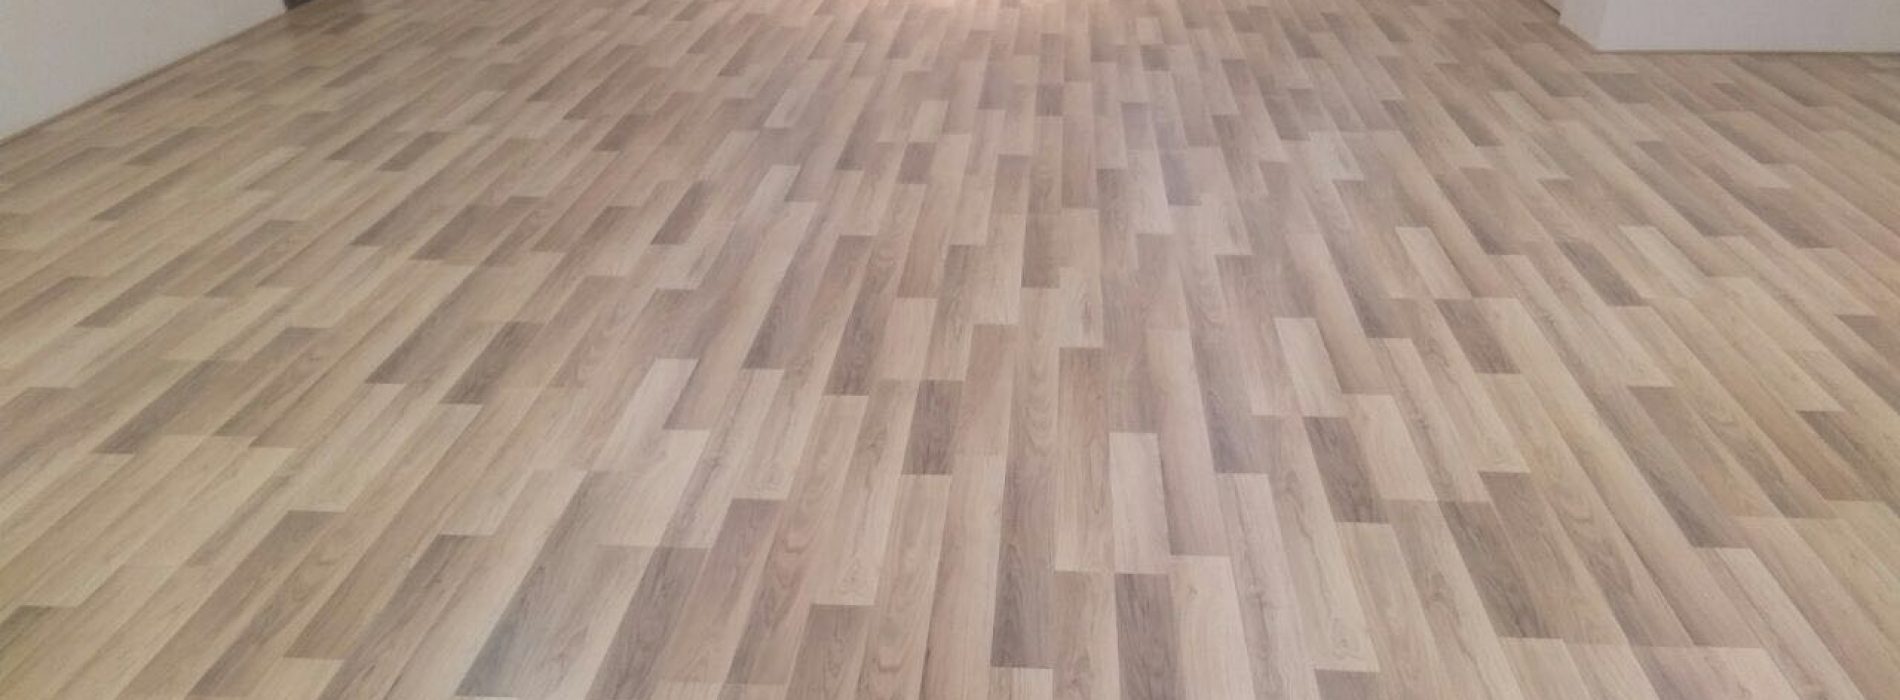 How Can Rubber Vinyl Flooring Tiles Save Your Home’s Aesthetics